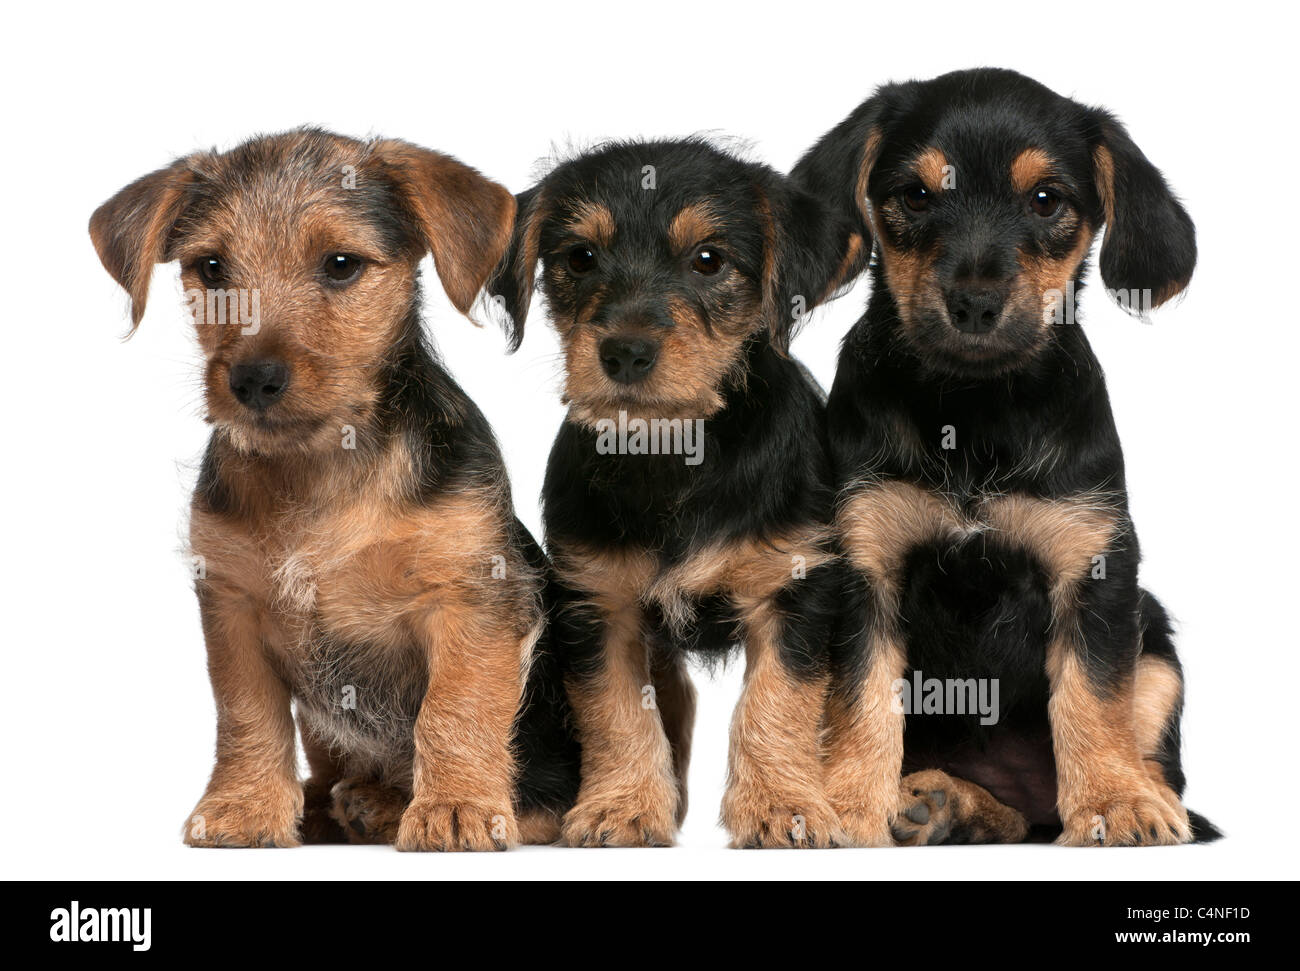 Mixed breed puppies, 8 weeks old, in front of white background Stock Photo